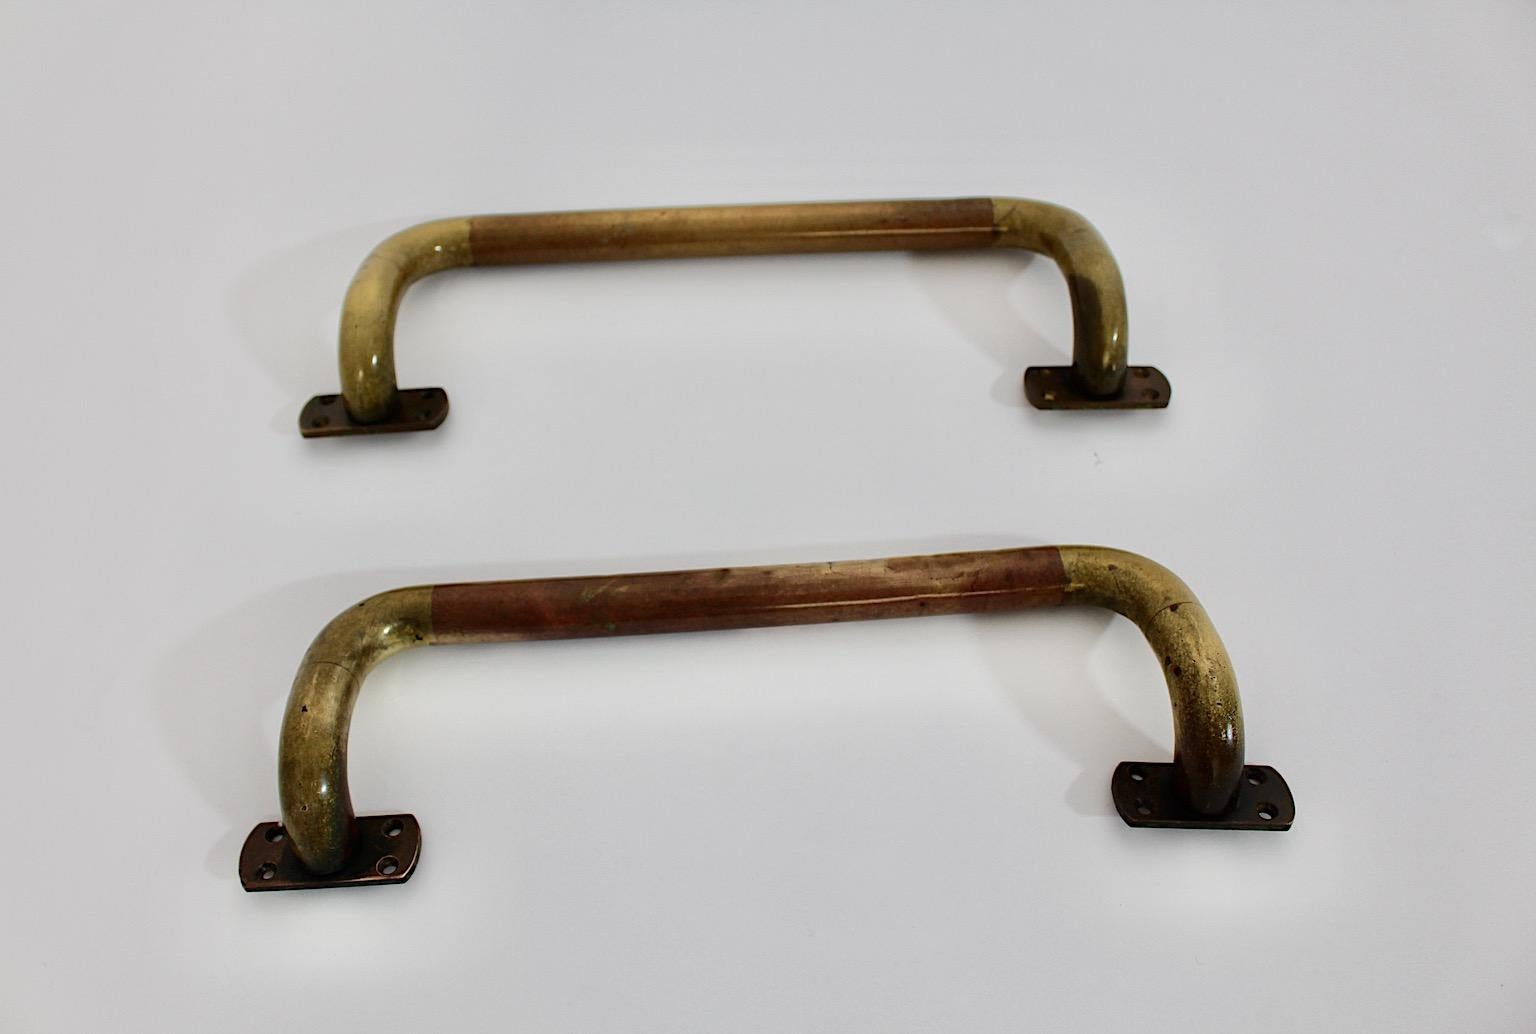 Art Deco Vintage Solid Brass Handles Towel Rails Towel BarPair Duo Austria 1930s In Good Condition For Sale In Vienna, AT